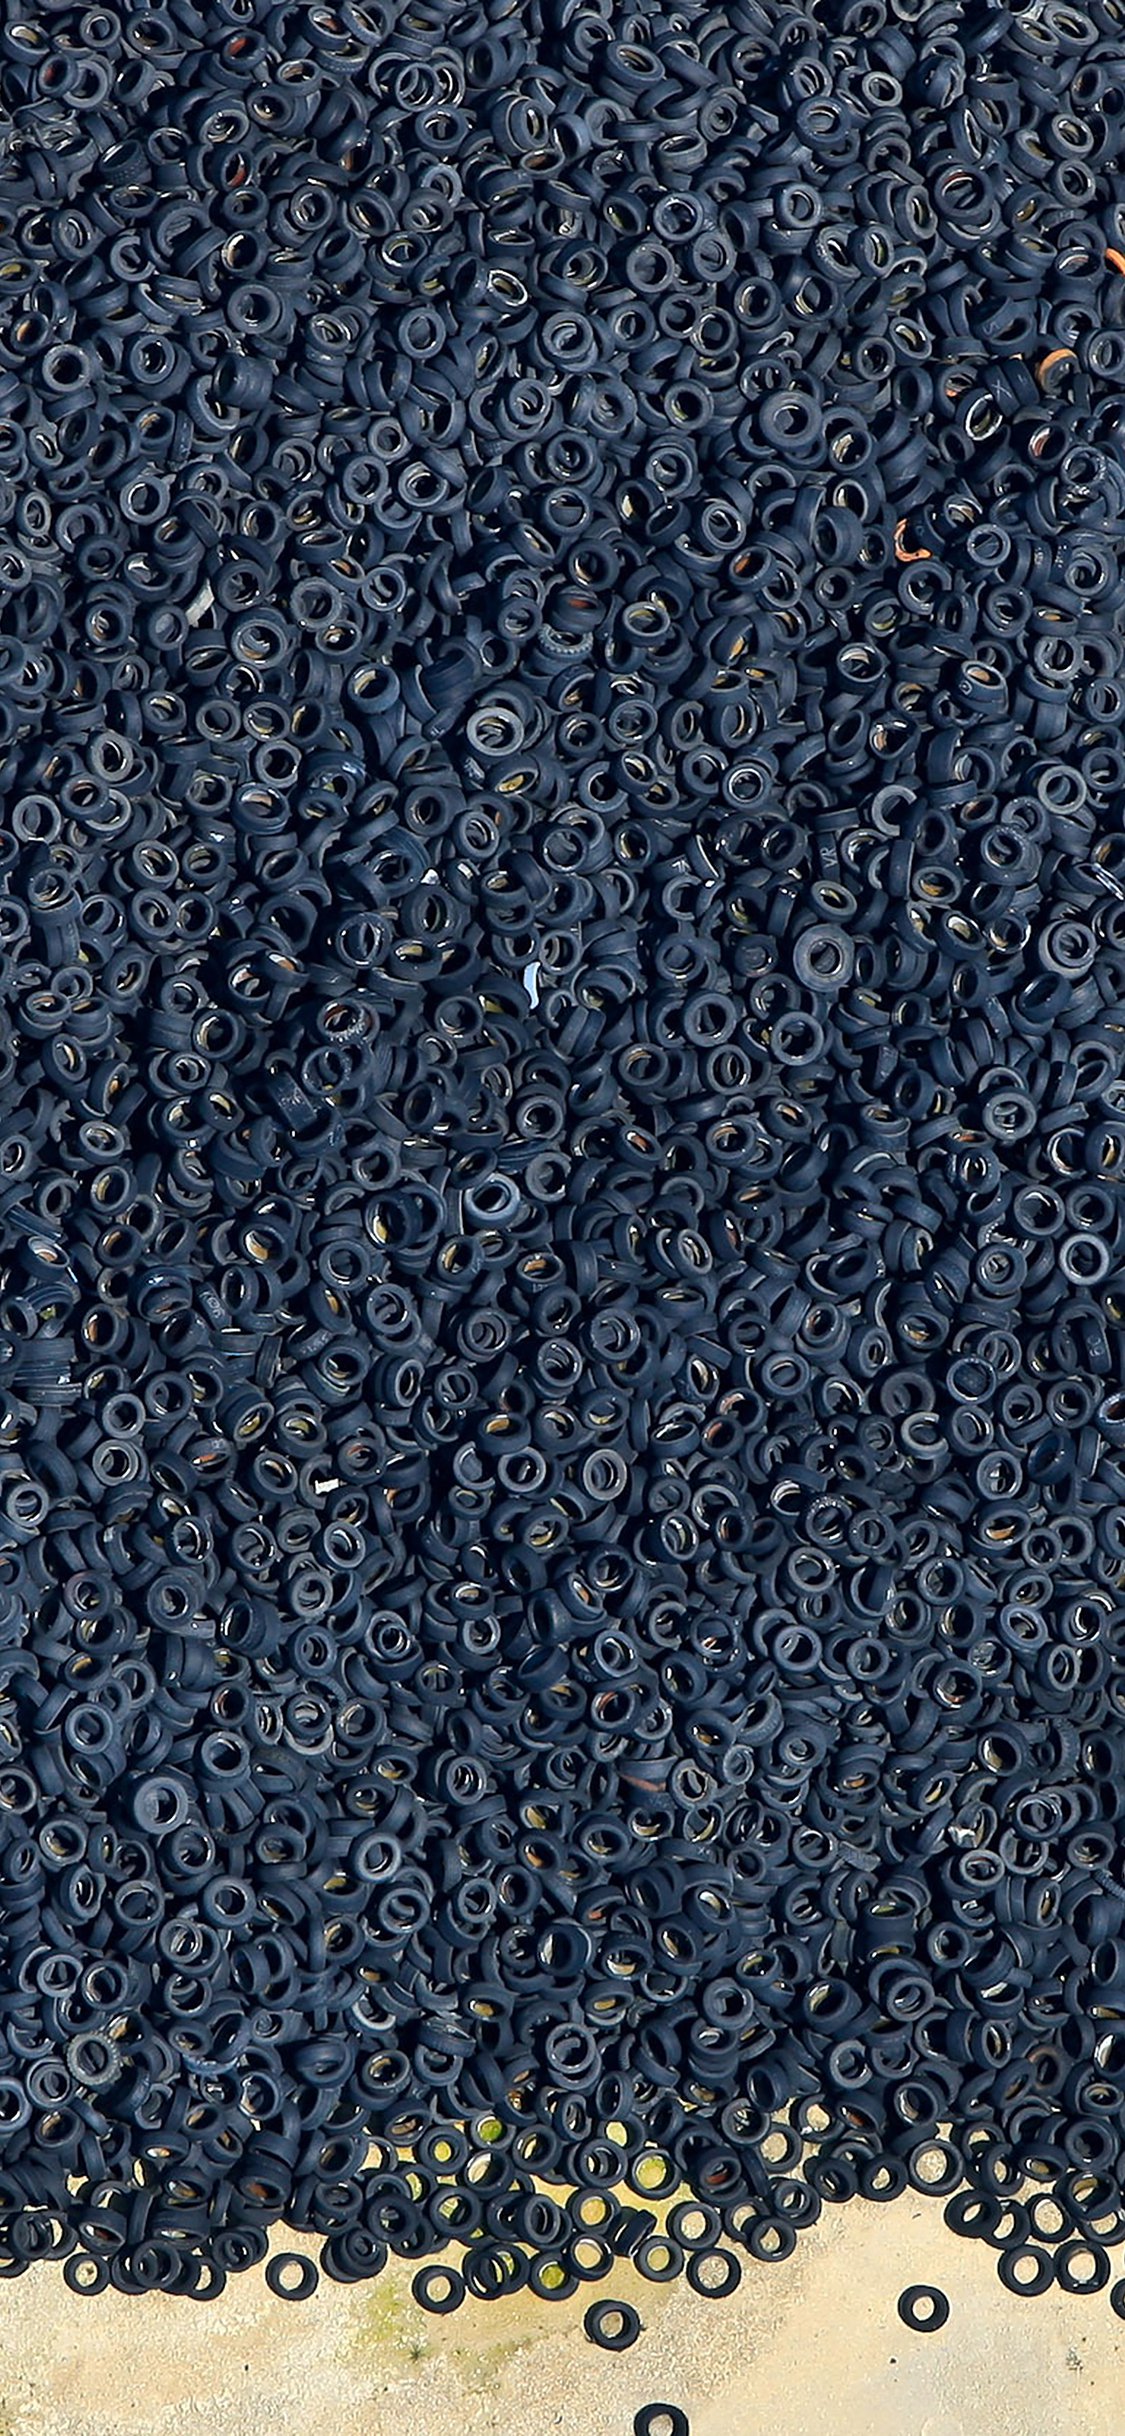 Texture Wallpapers For Iphone X - HD Wallpaper 